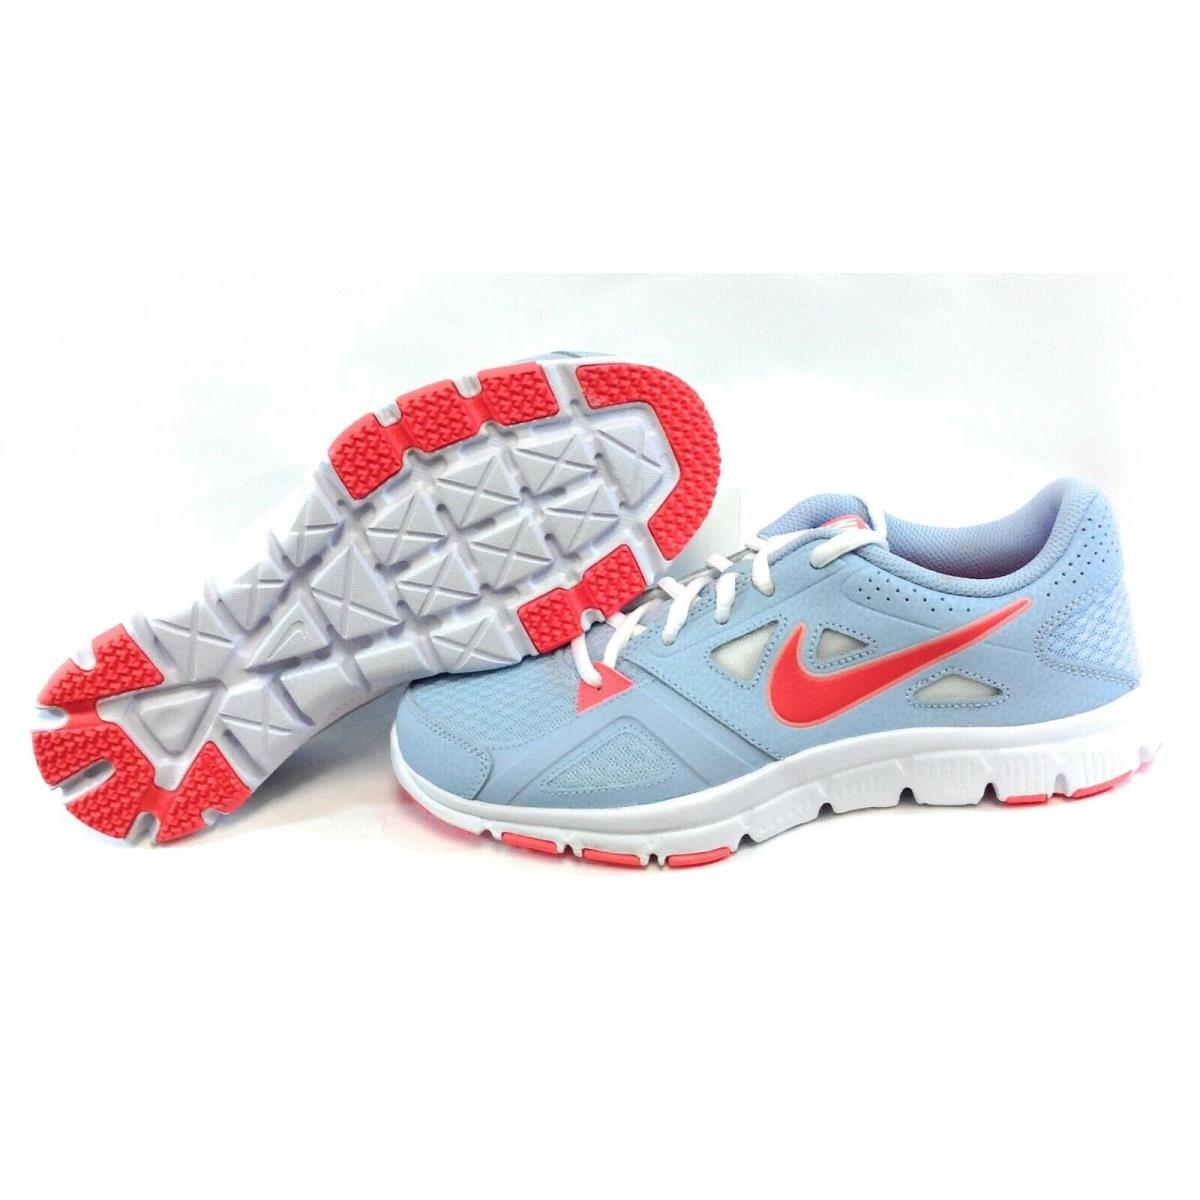 Girls Kids Youth Nike Flex Supreme Trainer 598873 400 2013 DS Sneakers Shoes - Blue